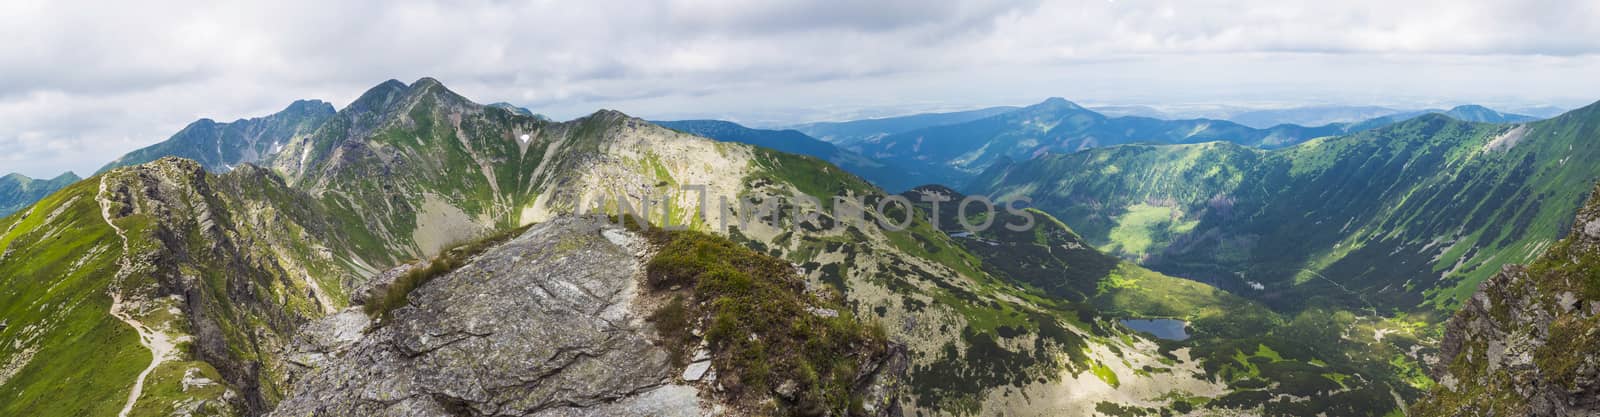 Panoramic view from Placlive peak on Western Tatra mountains or Rohace panorama. Sharp green mountains and lake rohacske pleso, ostry rohac, hruba kopa and volovec with hiking trail on ridge. Summer blue sky white clouds. by Henkeova